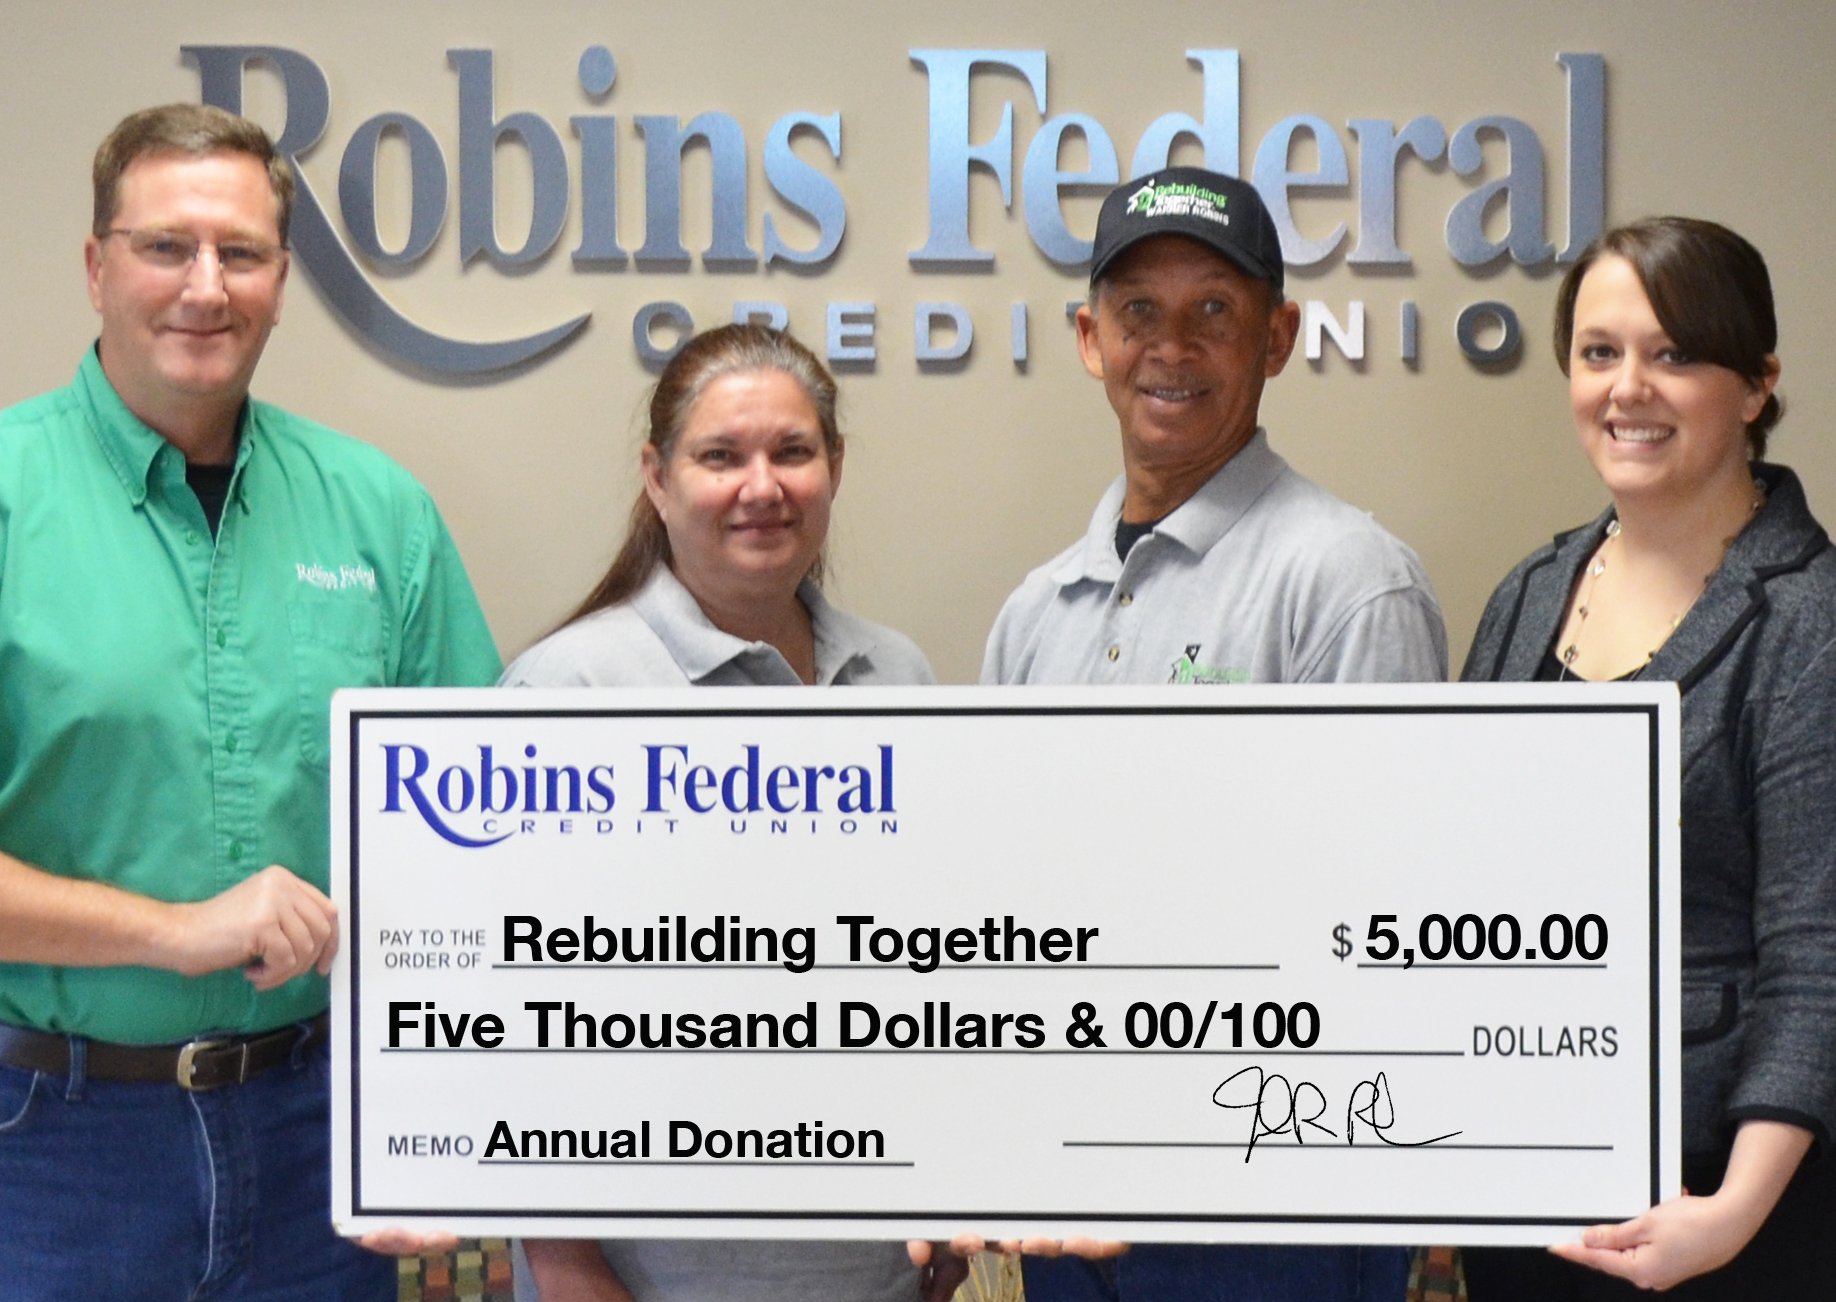 robins-federal-partners-with-rebuilding-together-warner-robins-cuinsight